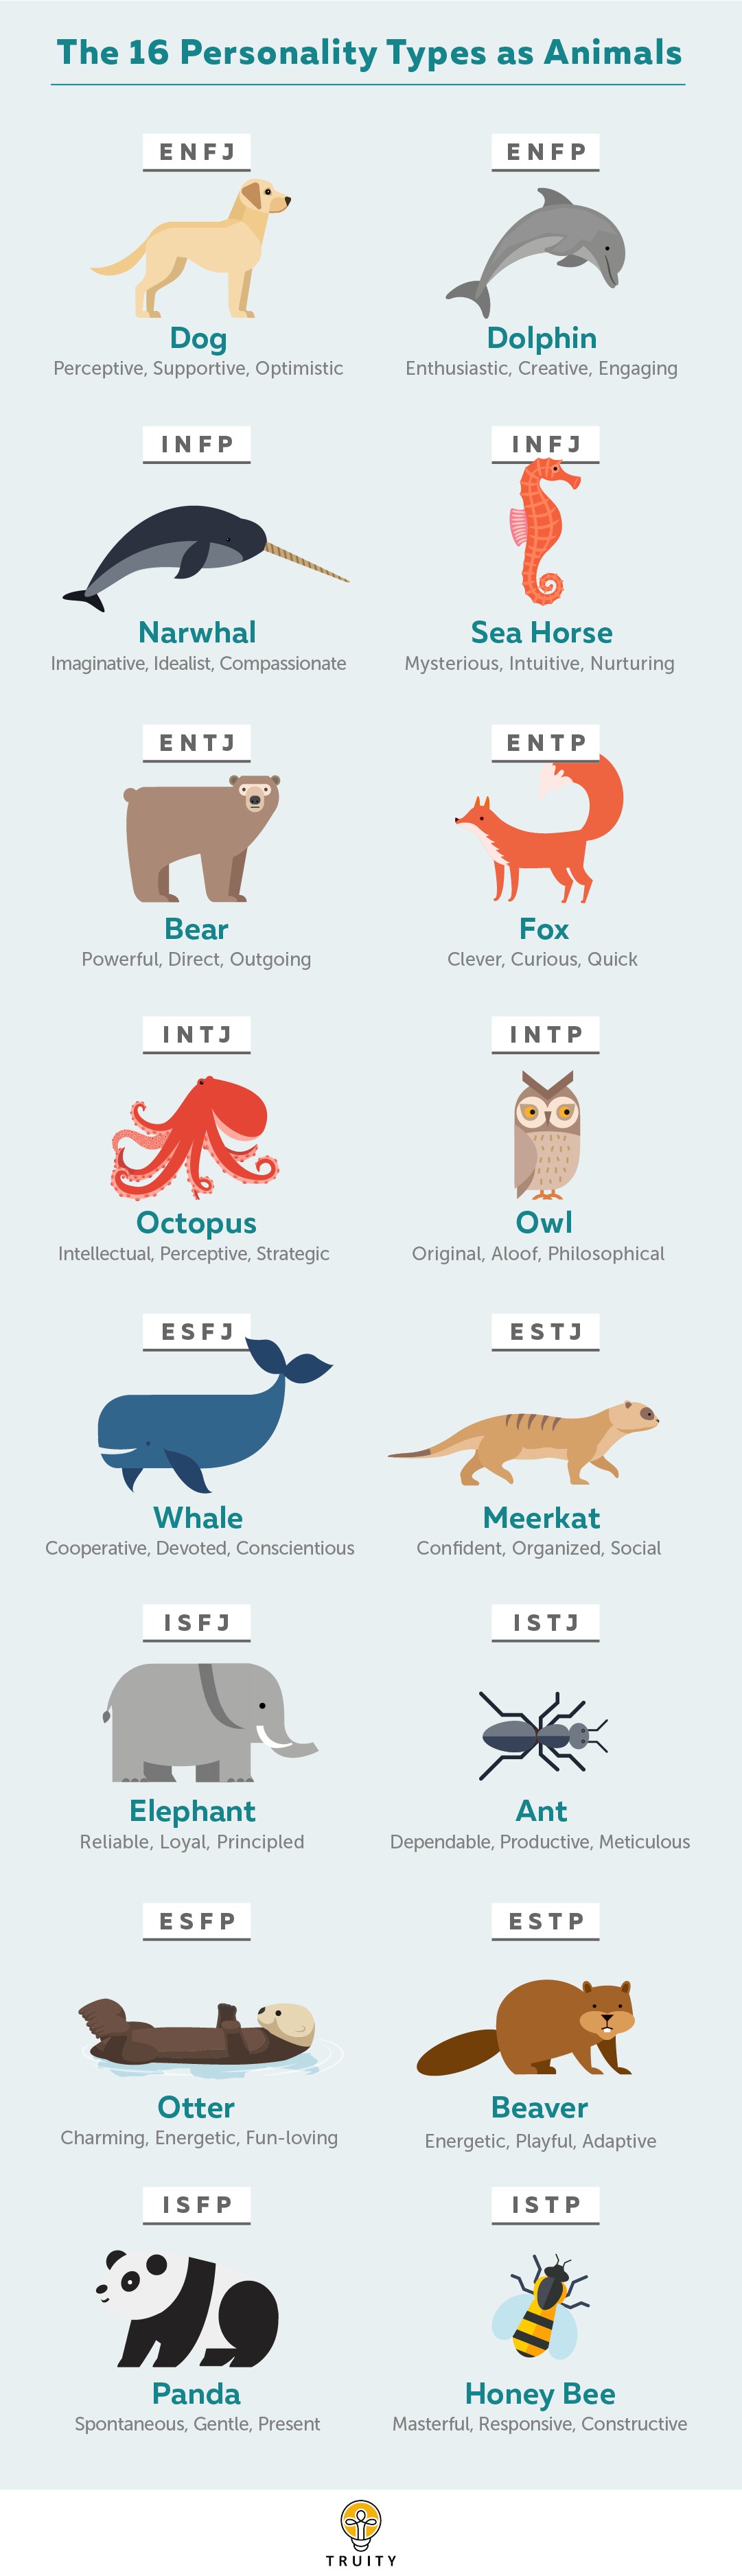 The 16 Personality Types as Animals | Truity